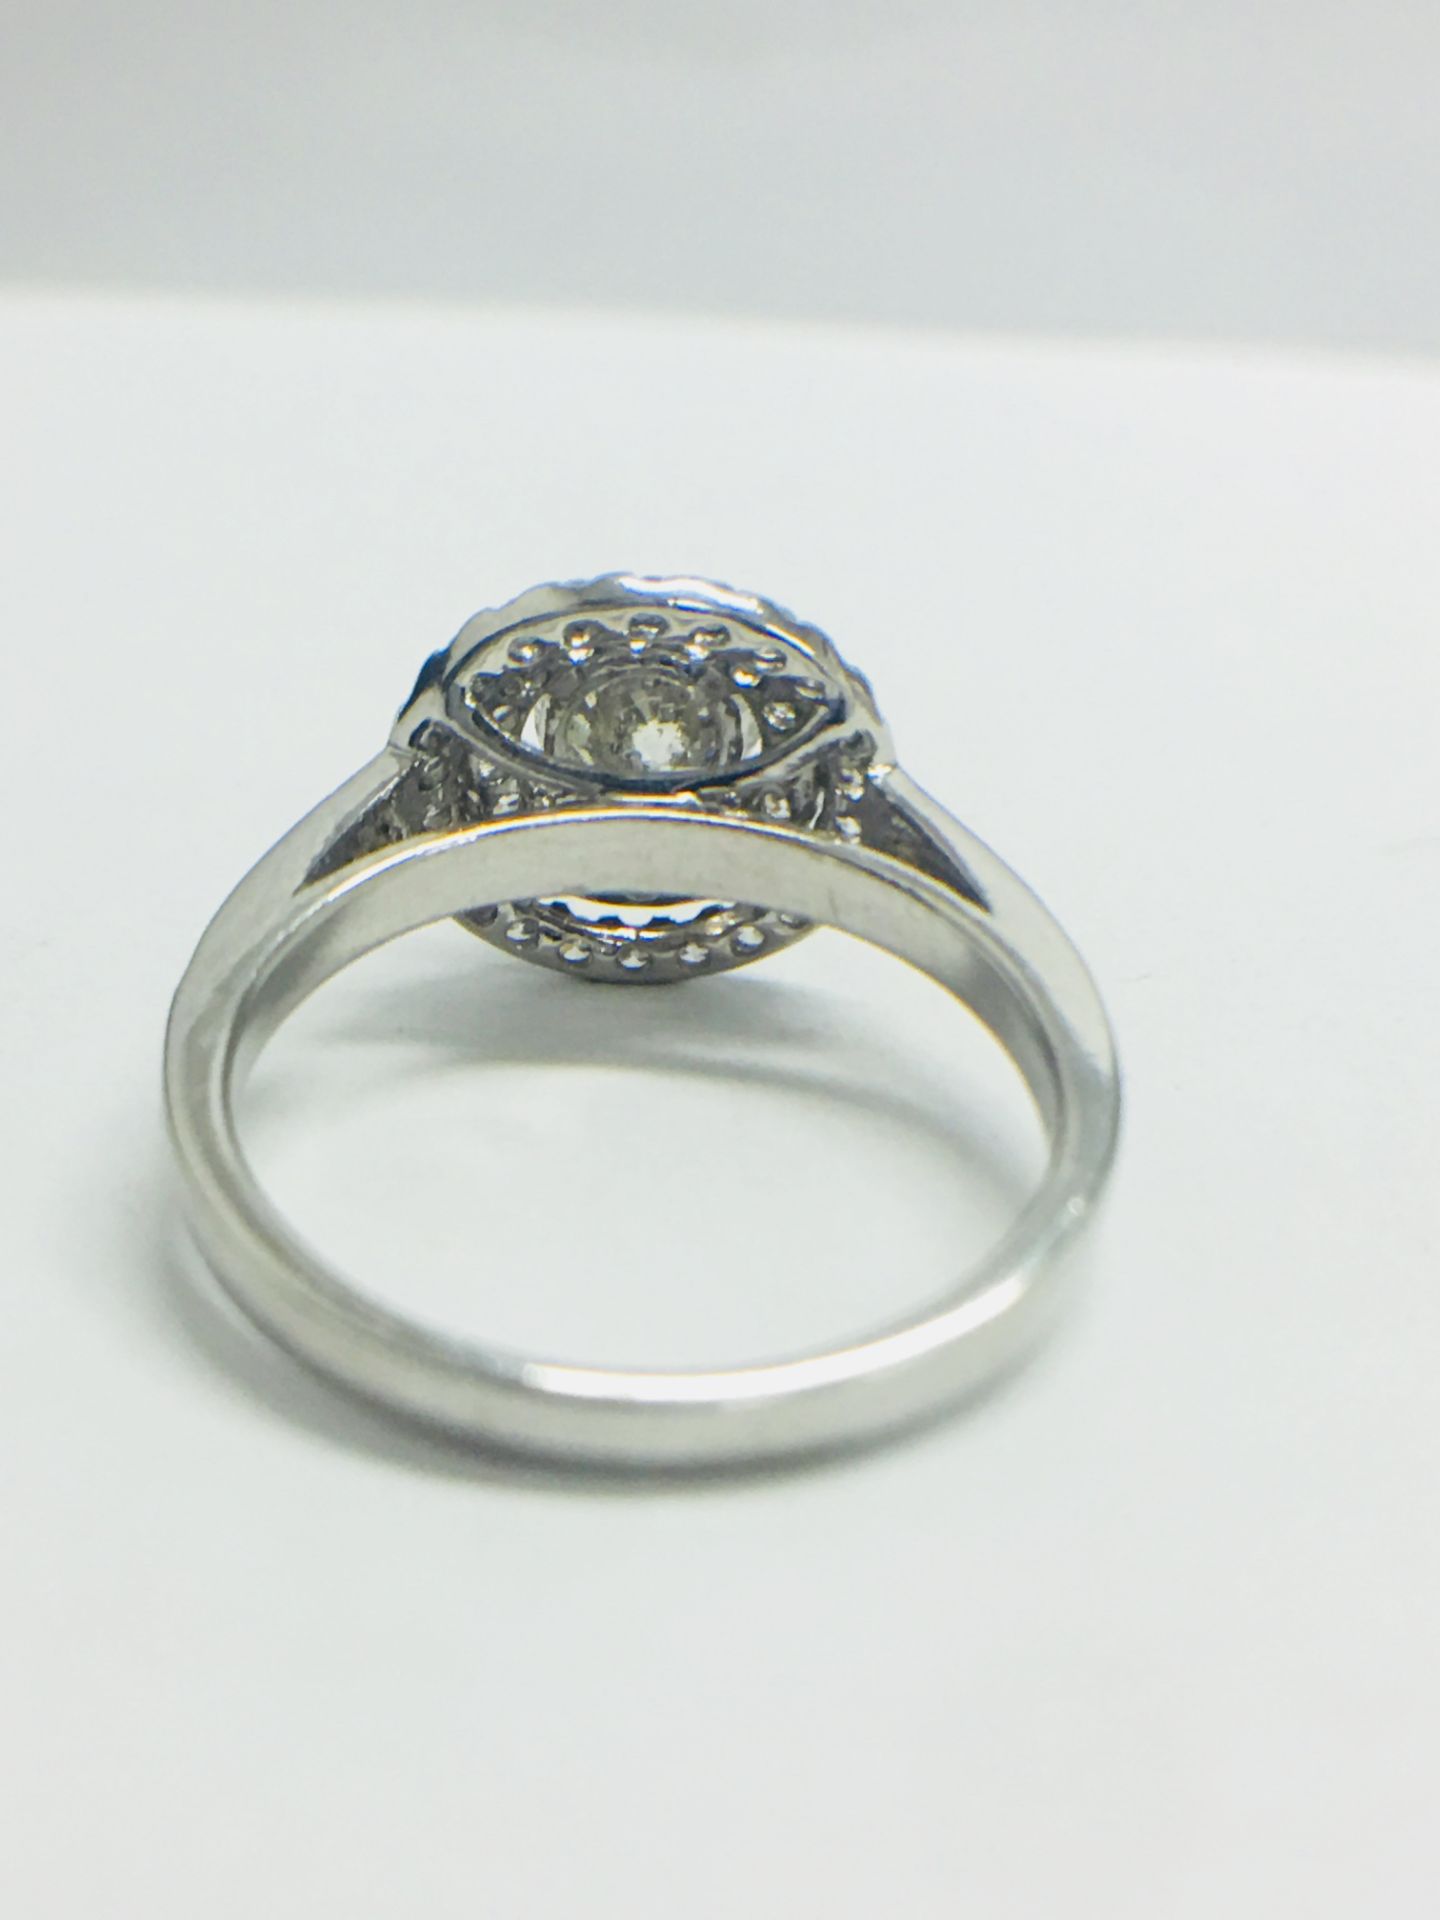 Platinum Double Halo Style Ring1.40Ct Total Diamond Weight, - Image 6 of 11